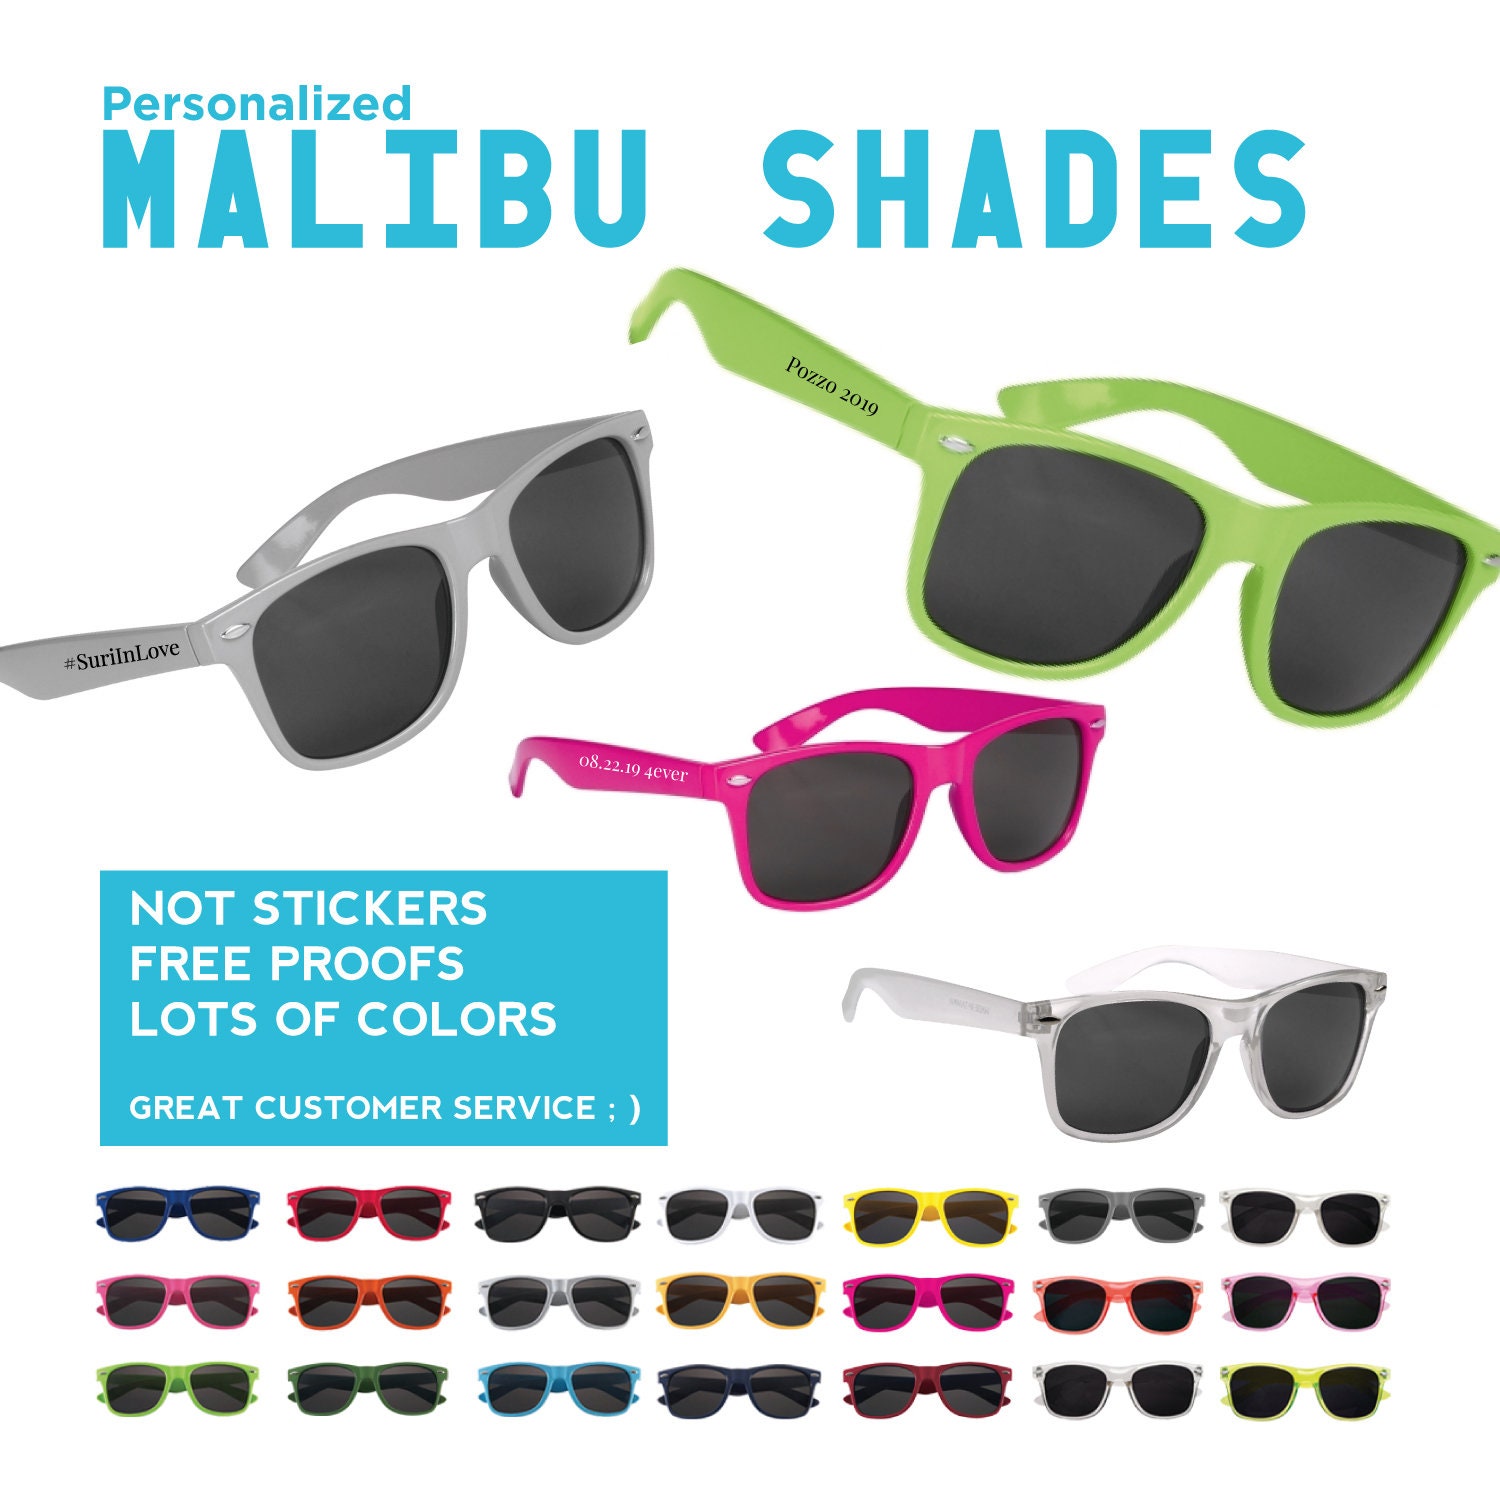 Buy FIT OVER SUNGLASSES WITH POLARIZED LENSES at Amazon.in